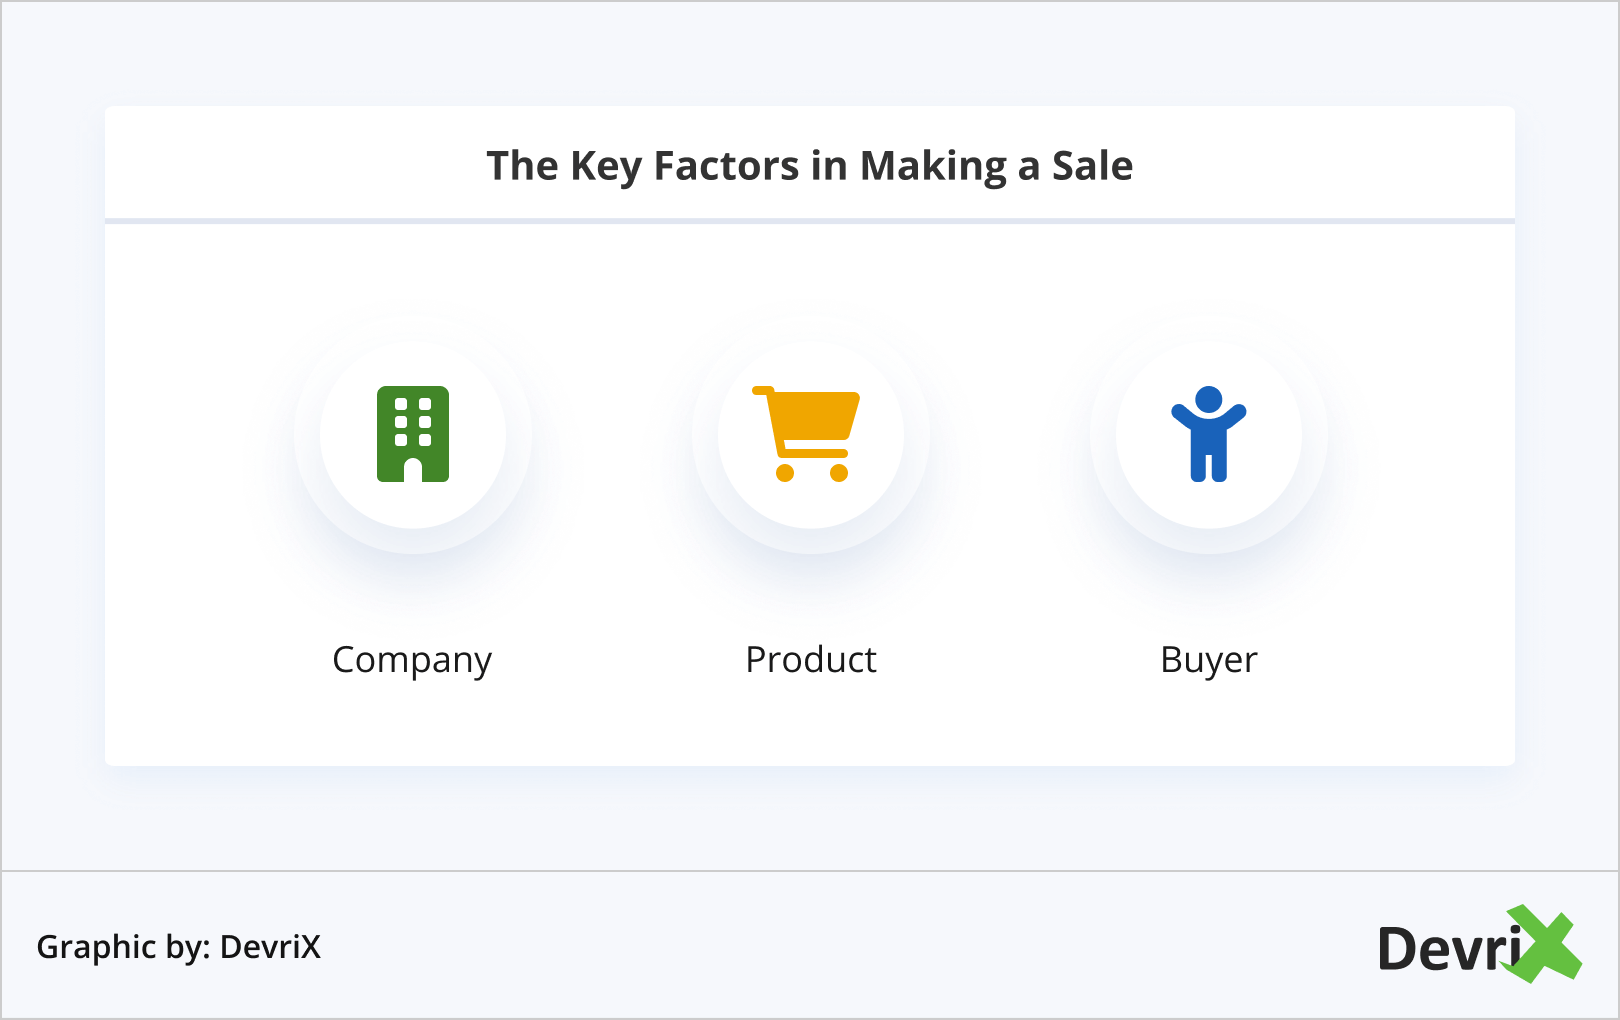 The Key Factors in Making a Sale